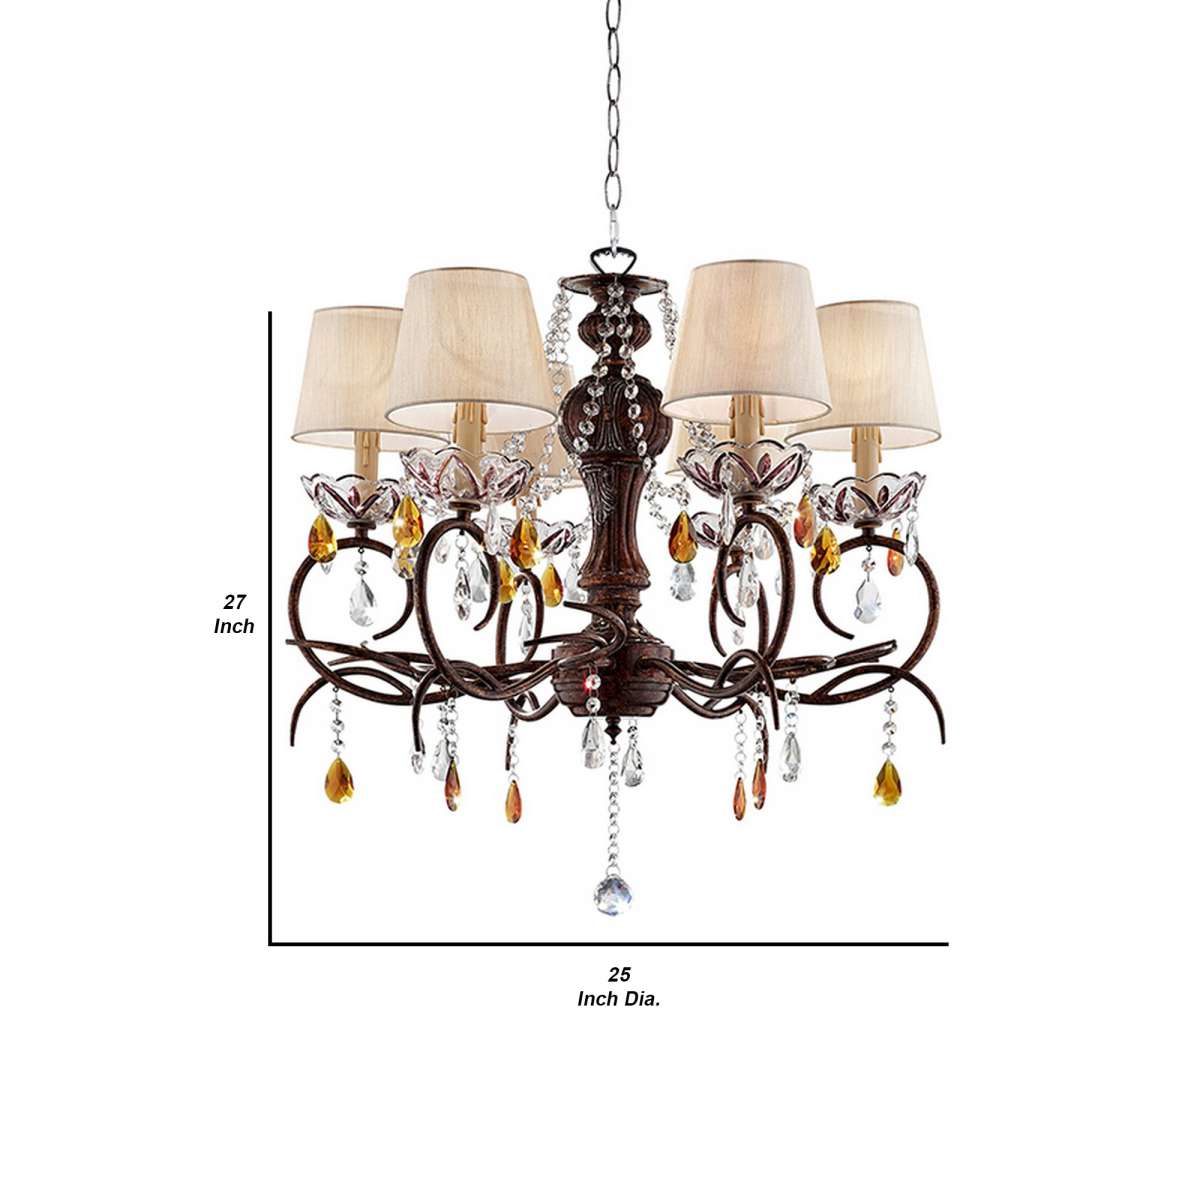 Ceiling Lamp With Scrolled Frame And 6 Bell Shade, Bronze By Benzara